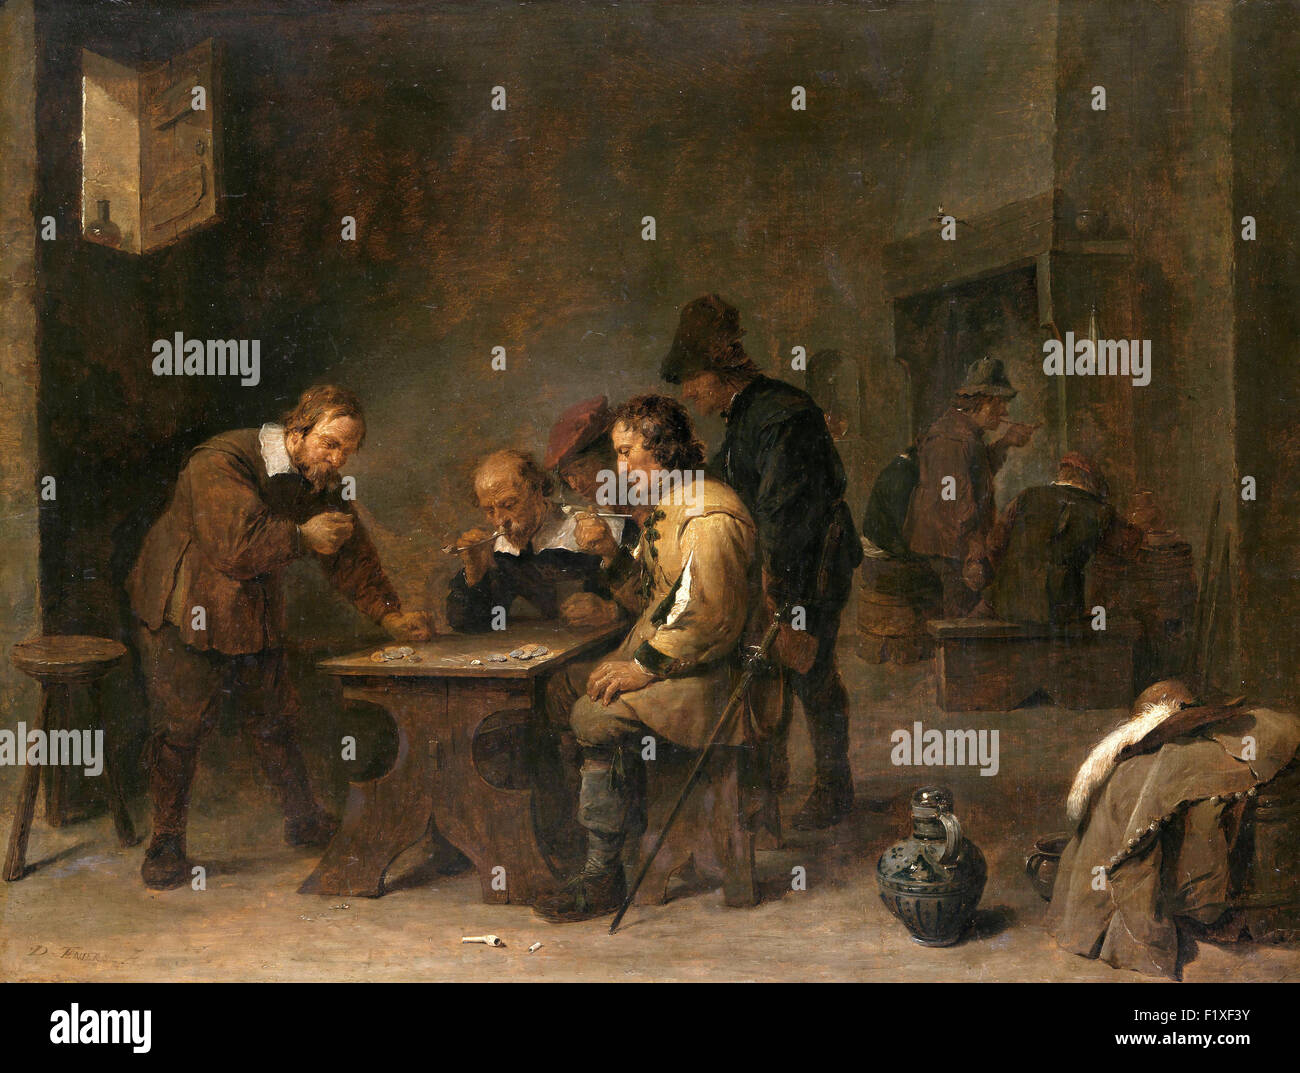 David Teniers the Younger - The Gamblers Stock Photo